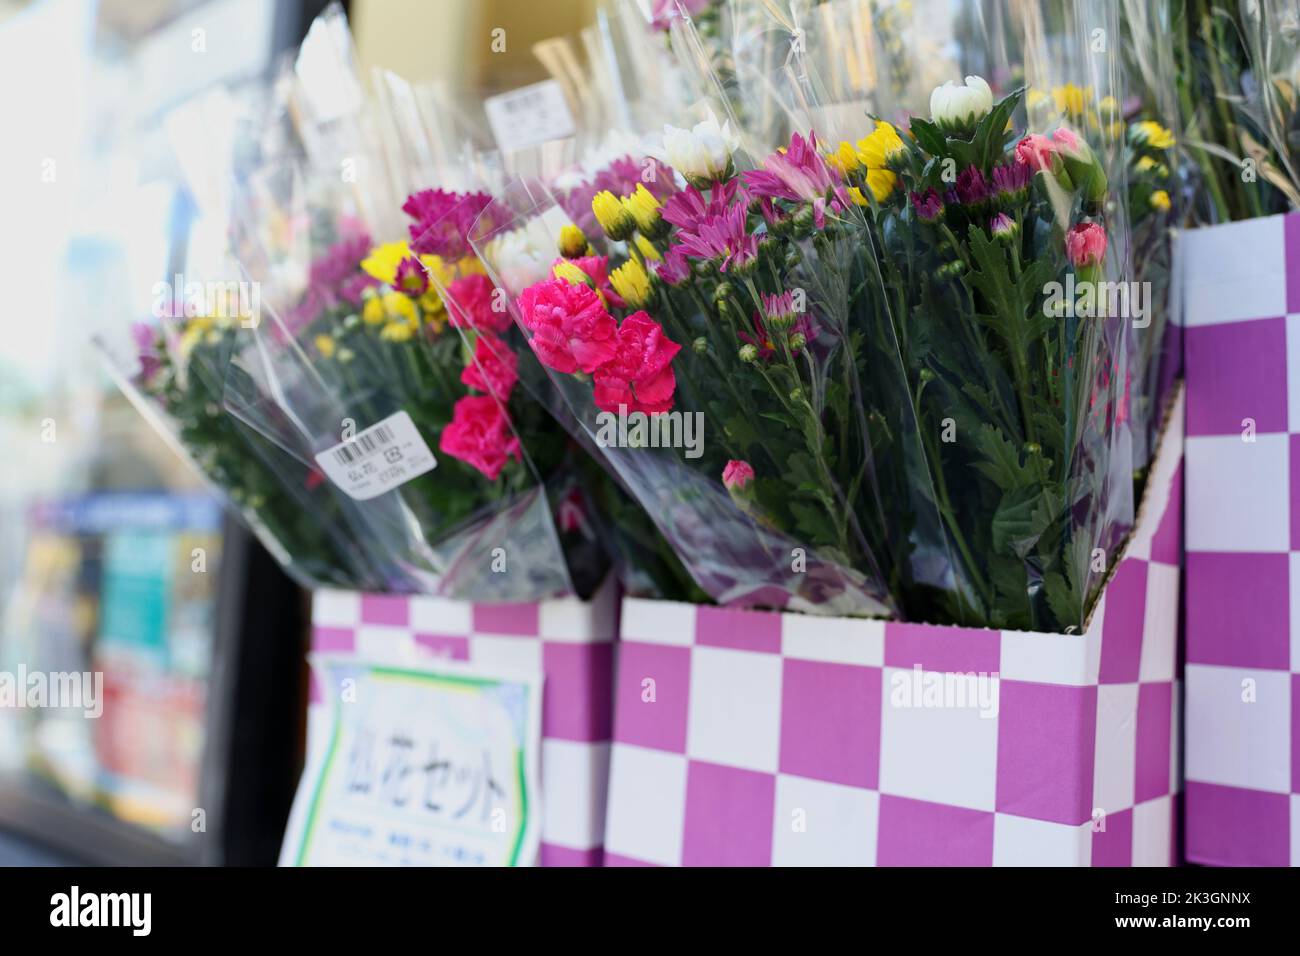 Tokyo, Japan on September 27, 2022Flowers are seen at a shop near the Nippon Budokan ahead of the state funeral for Japan's former Prime Minister Shinzo Abe in Tokyo, Japan on September 27, 2022. Credit: Naoki Nishimura/AFLO/Alamy Live News Stock Photo